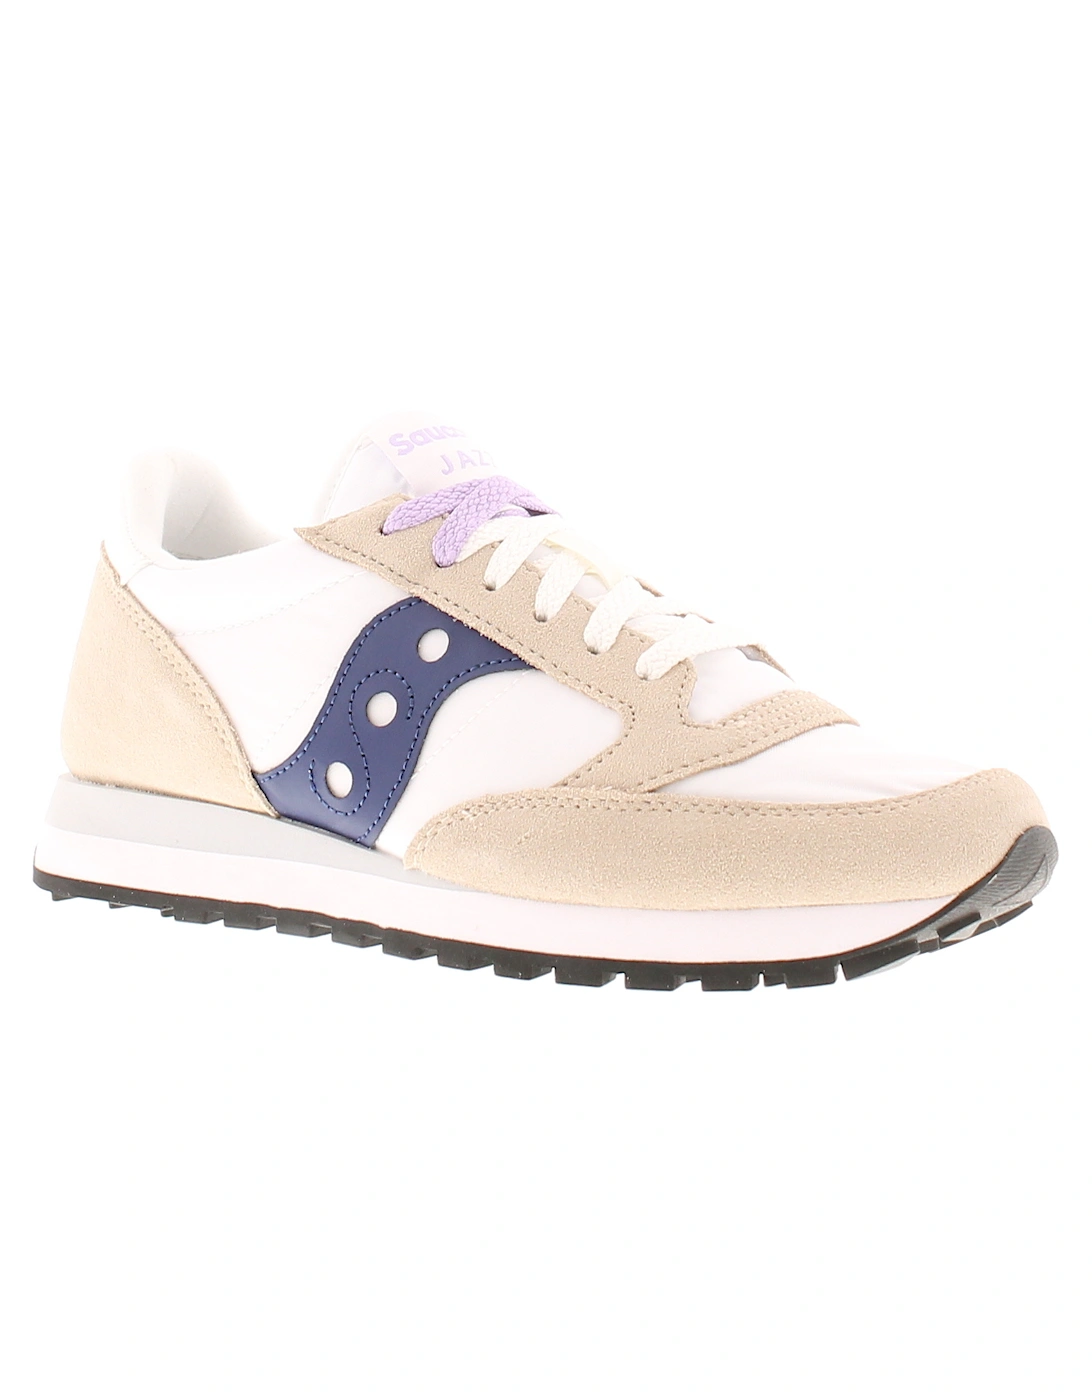 Womens Trainers Jazz Original Lace Up white beige navy UK Size, 6 of 5